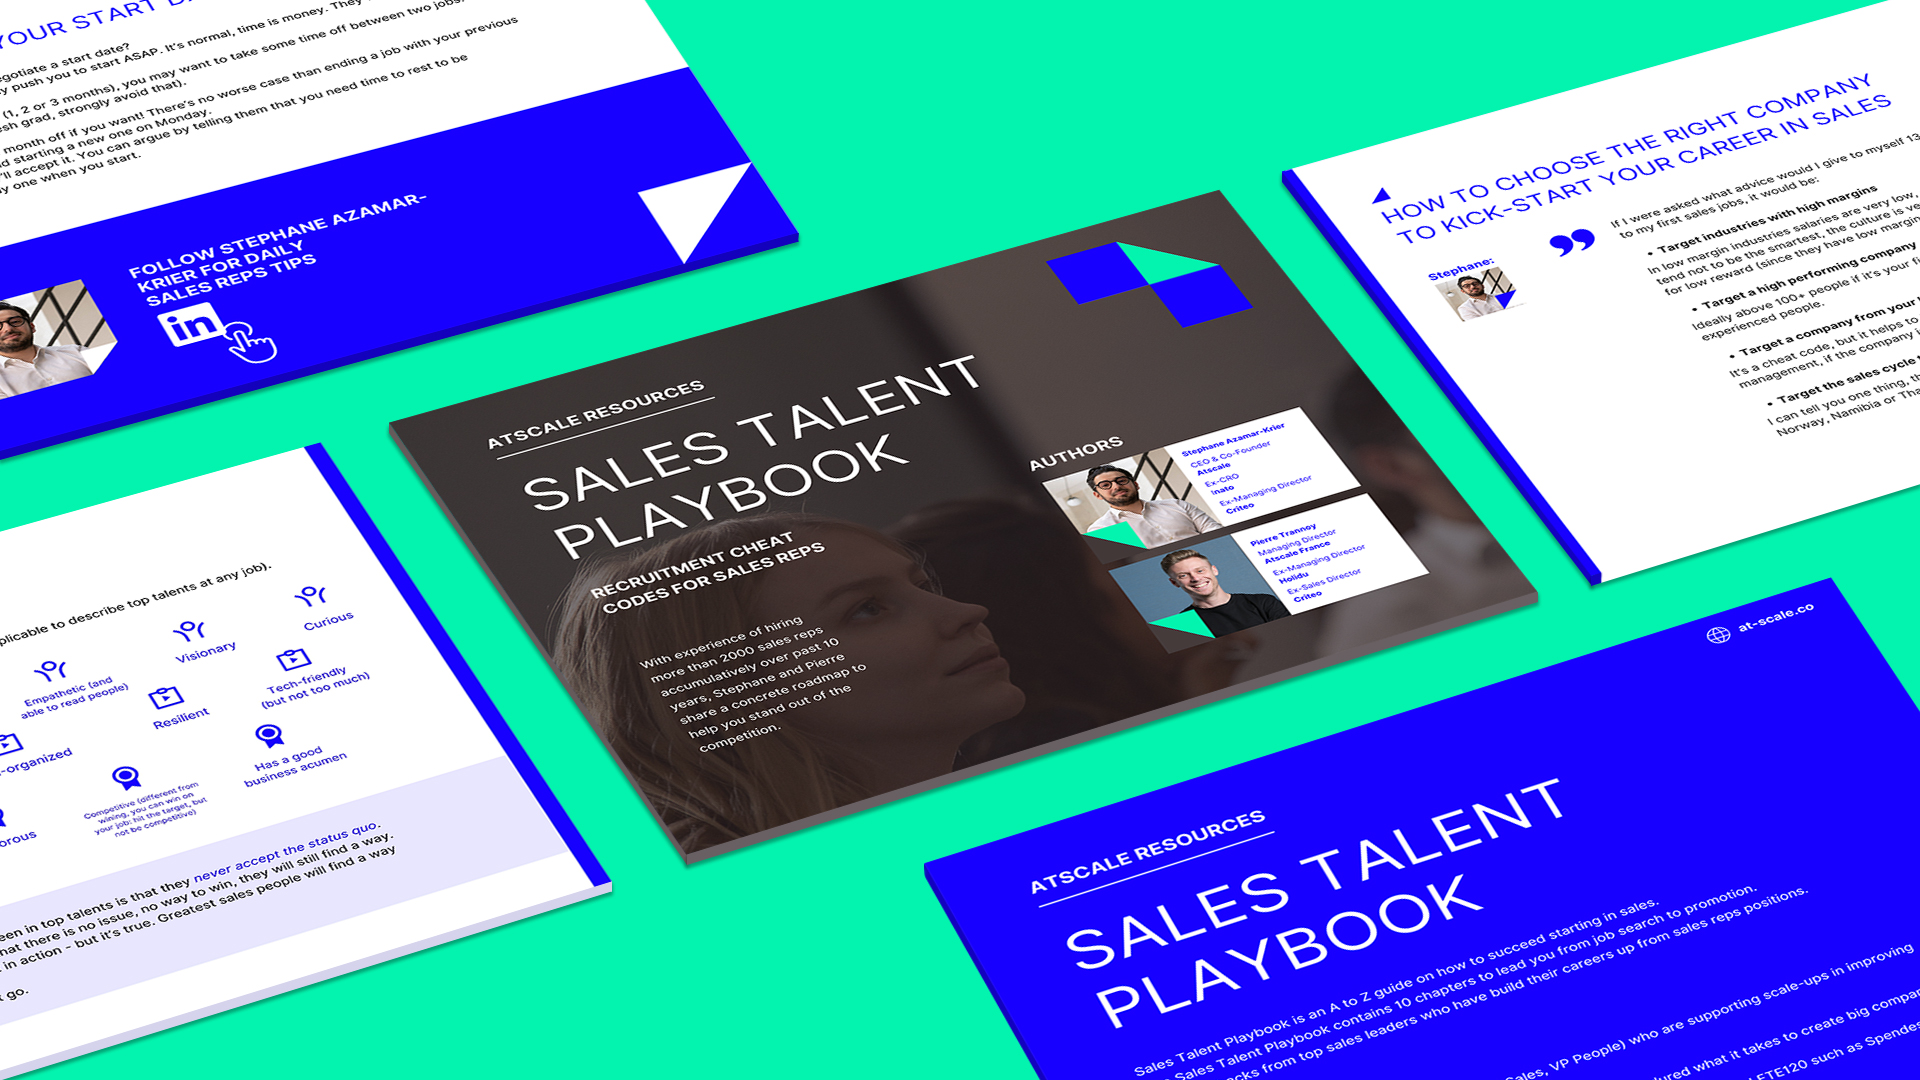 The Sales Talent<br />
Playbook - atscale